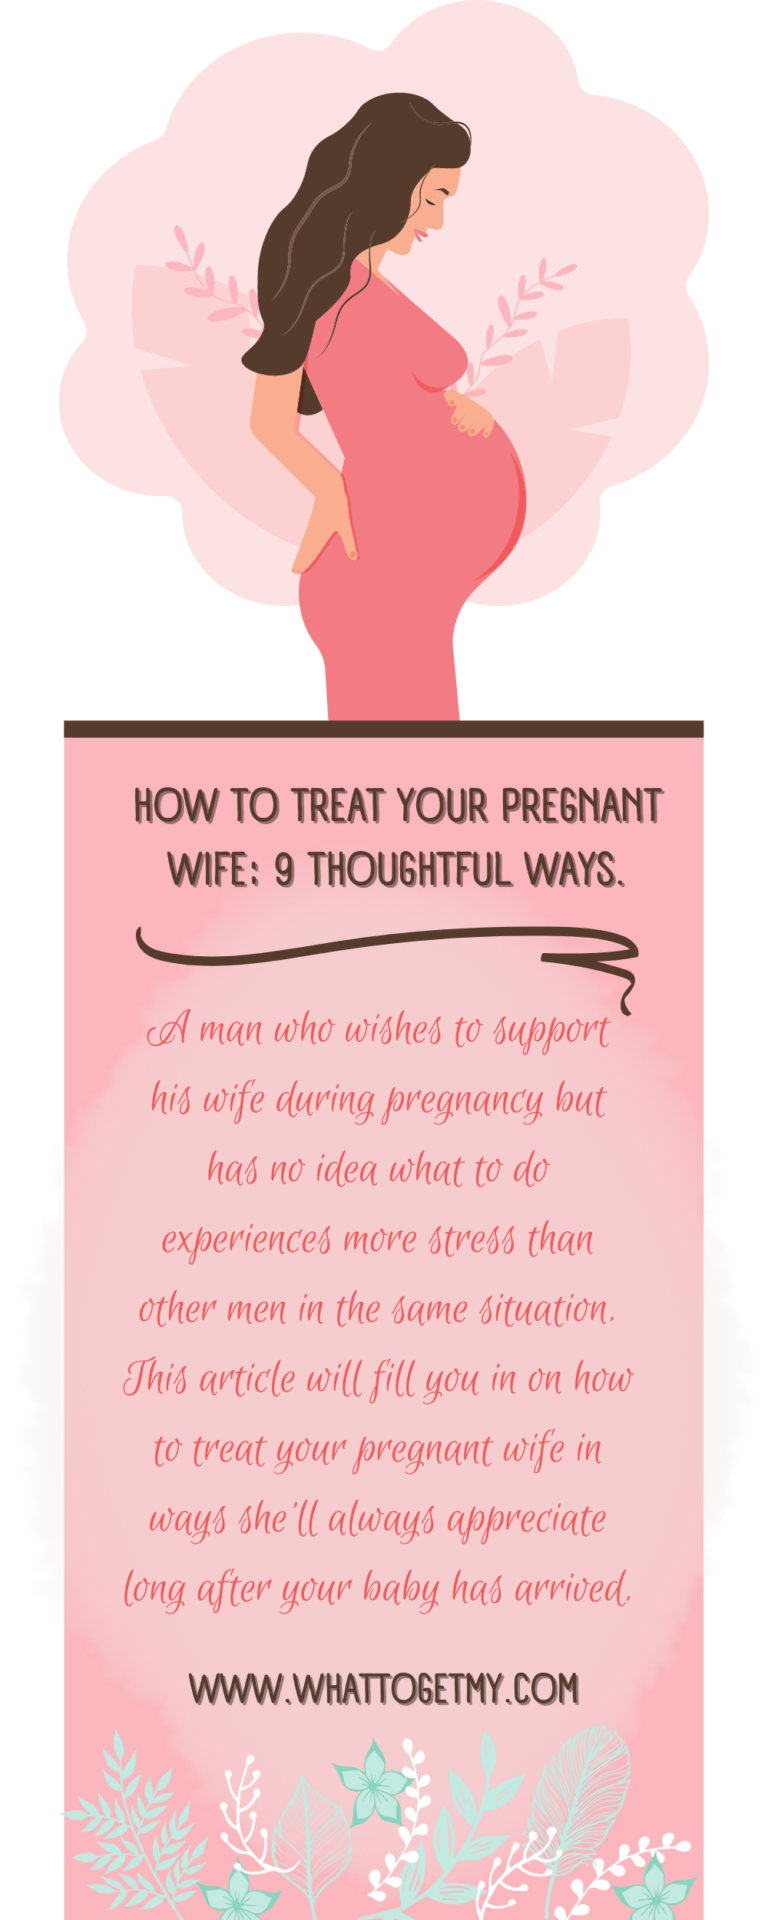 How to treat your pregnant wife: 9 thoughtful ways. - What to get my...